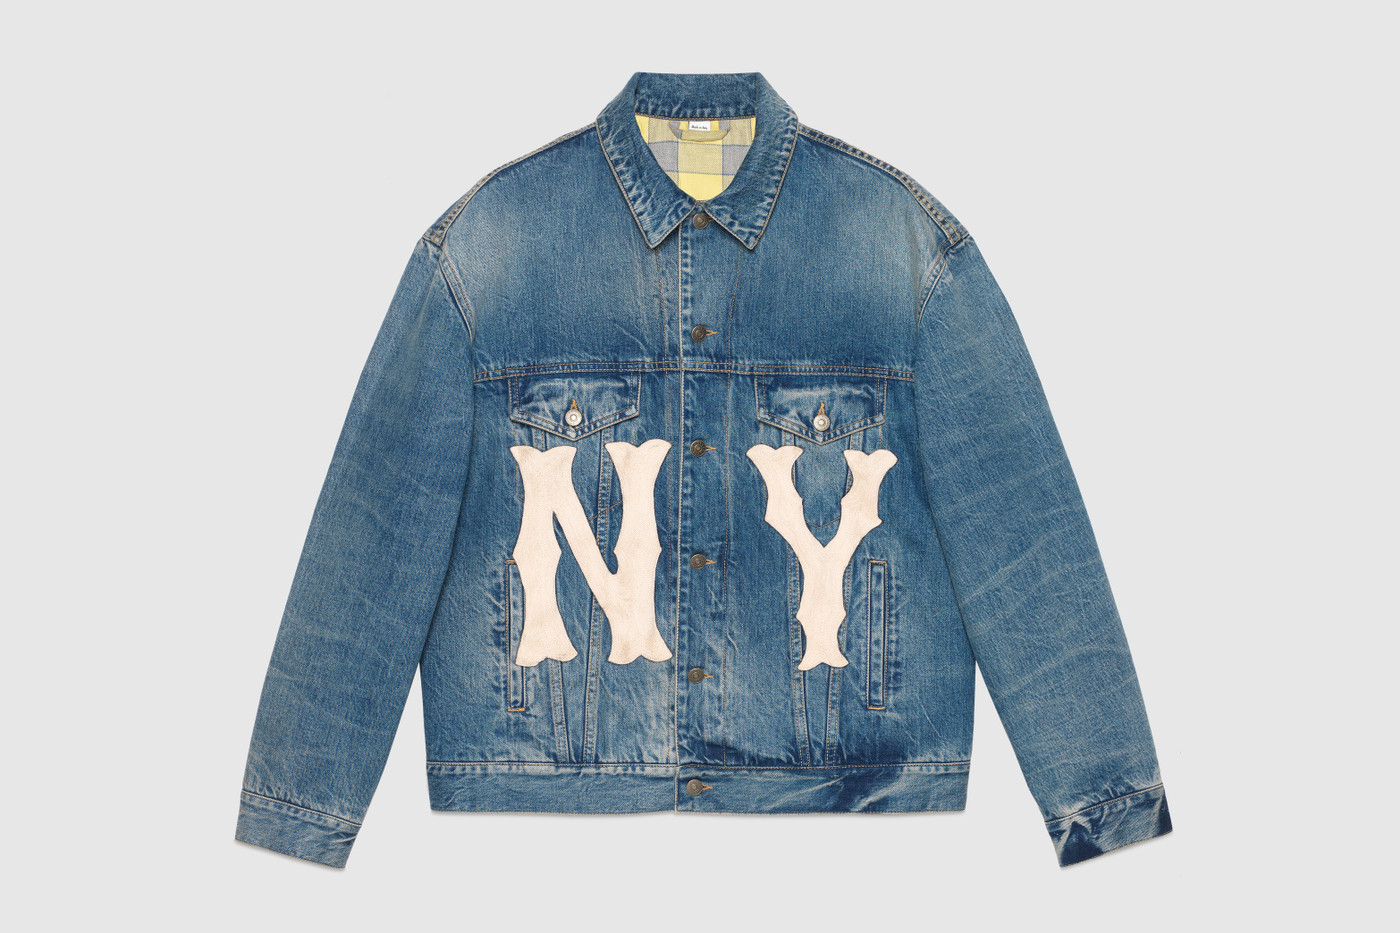 A Shortlist of Gucci and New York Yankees Collection